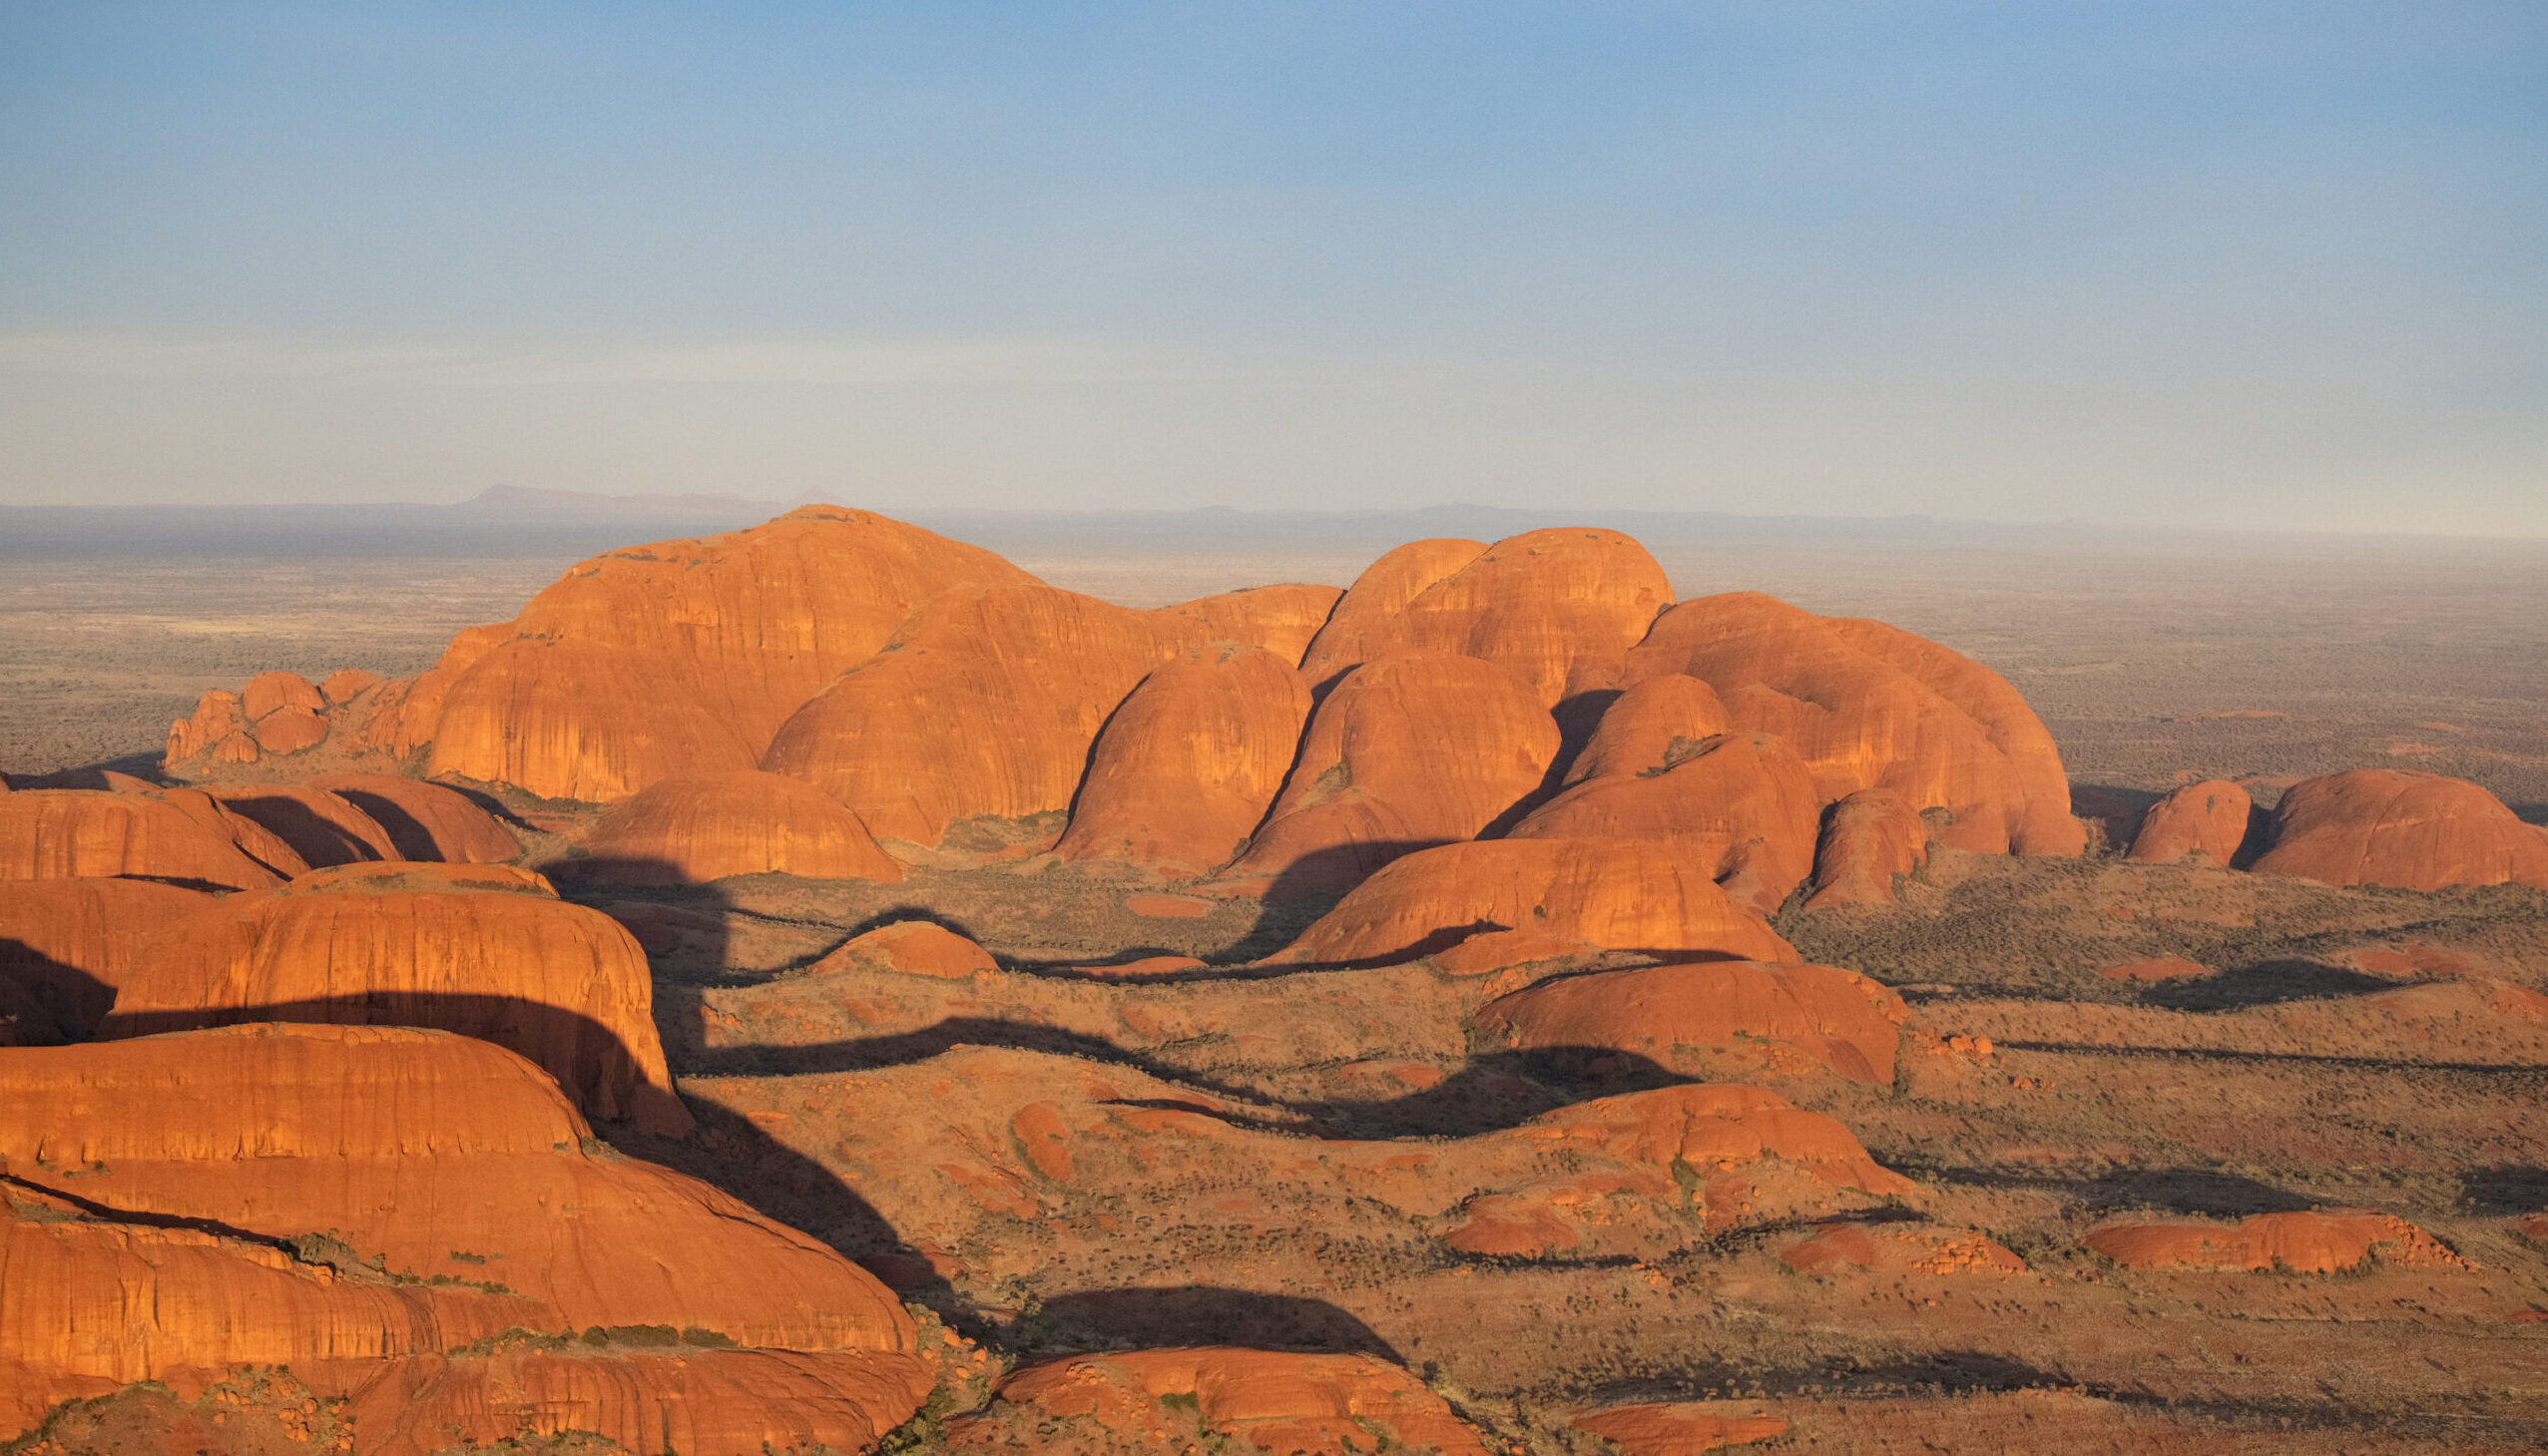 View of Kata Tjuta from a scenic helicopter flight